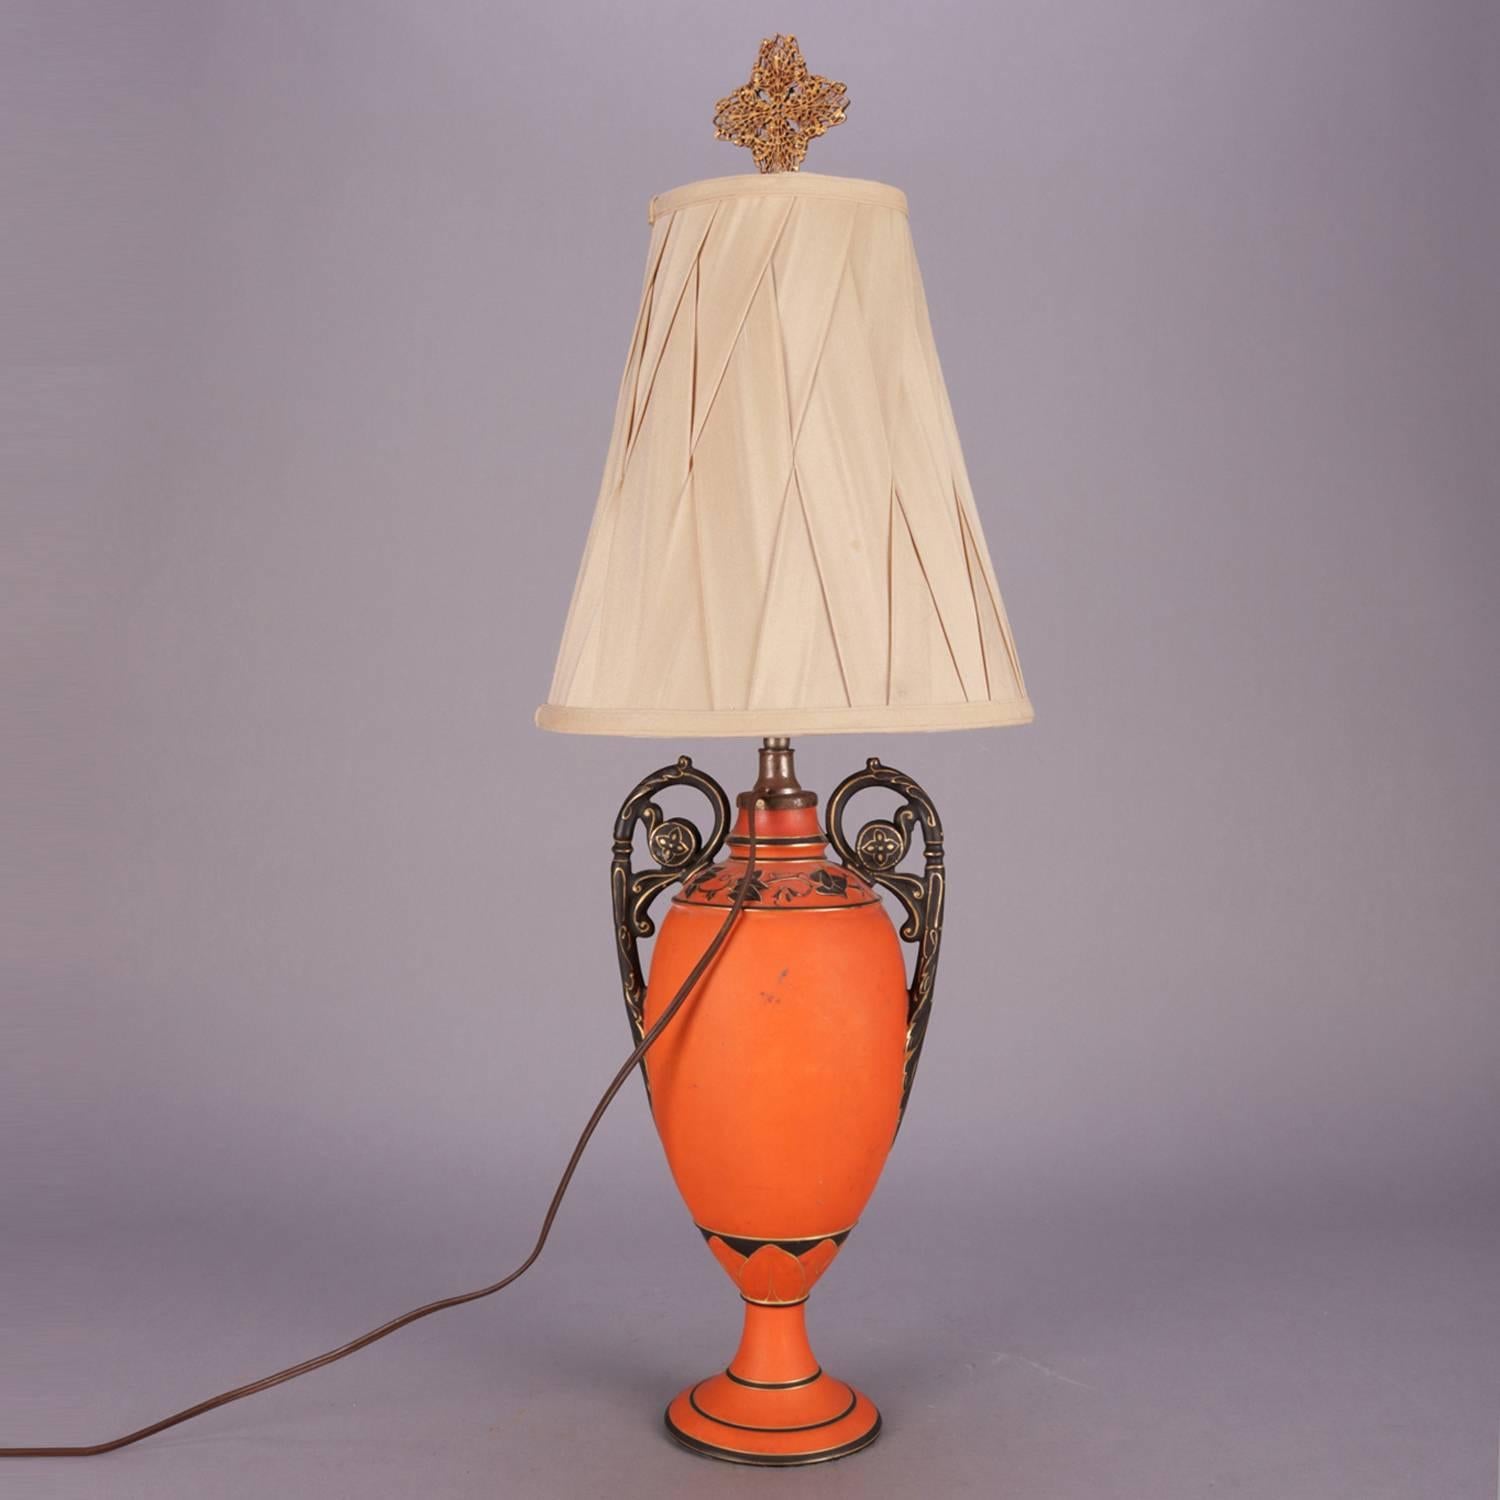 20th Century Vintage French Sevres School Hand-Painted and Gilt Porcelain Table Lamp